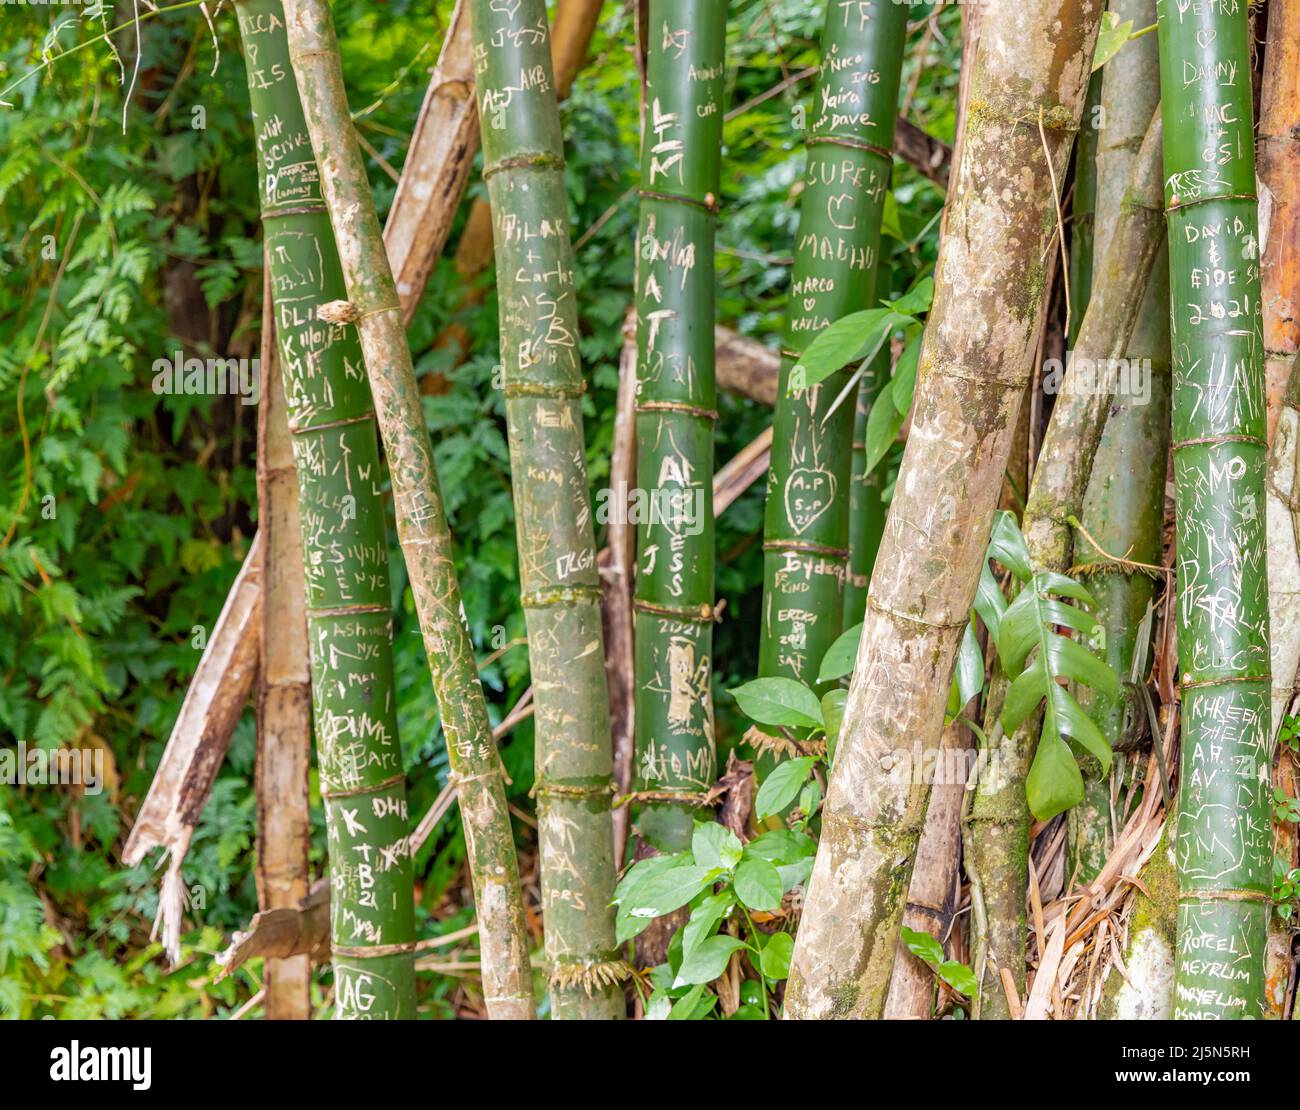 Detail image of names and intials carved into bamboo in El Yunque forest Stock Photo